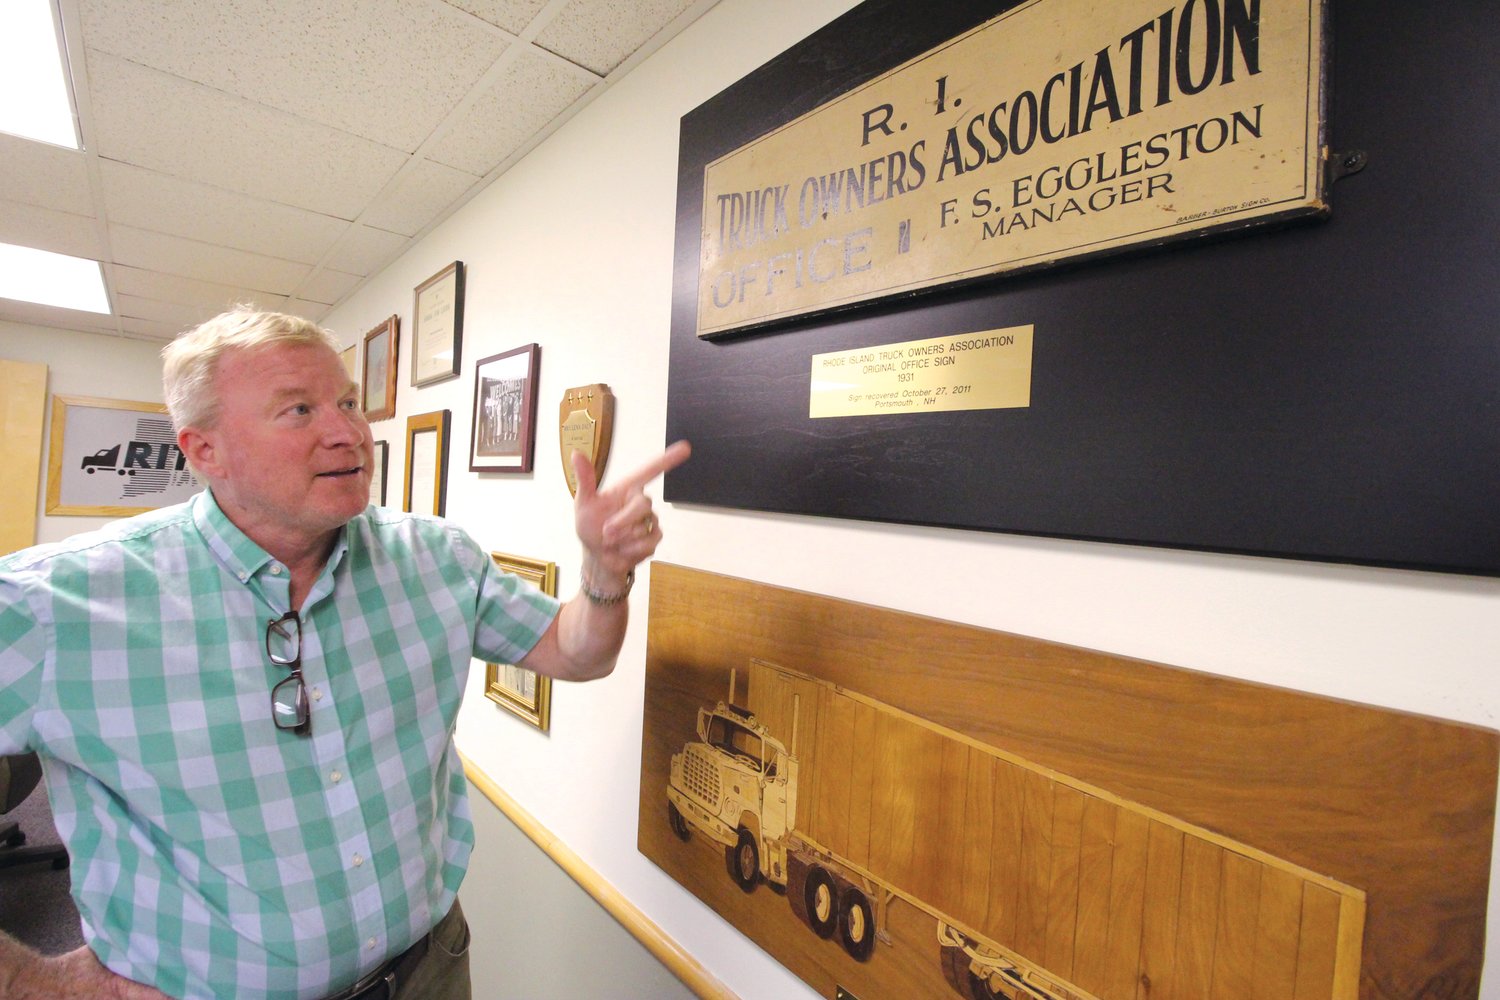 THERE TO HELPER TRUCKERS: Chris Maxwell is president and CEO of the Rhode Island Trucking Association, which started in 1931. The organization has offices in Pawtucket, but will soon be moving to Bald Hill Road in Warwick.